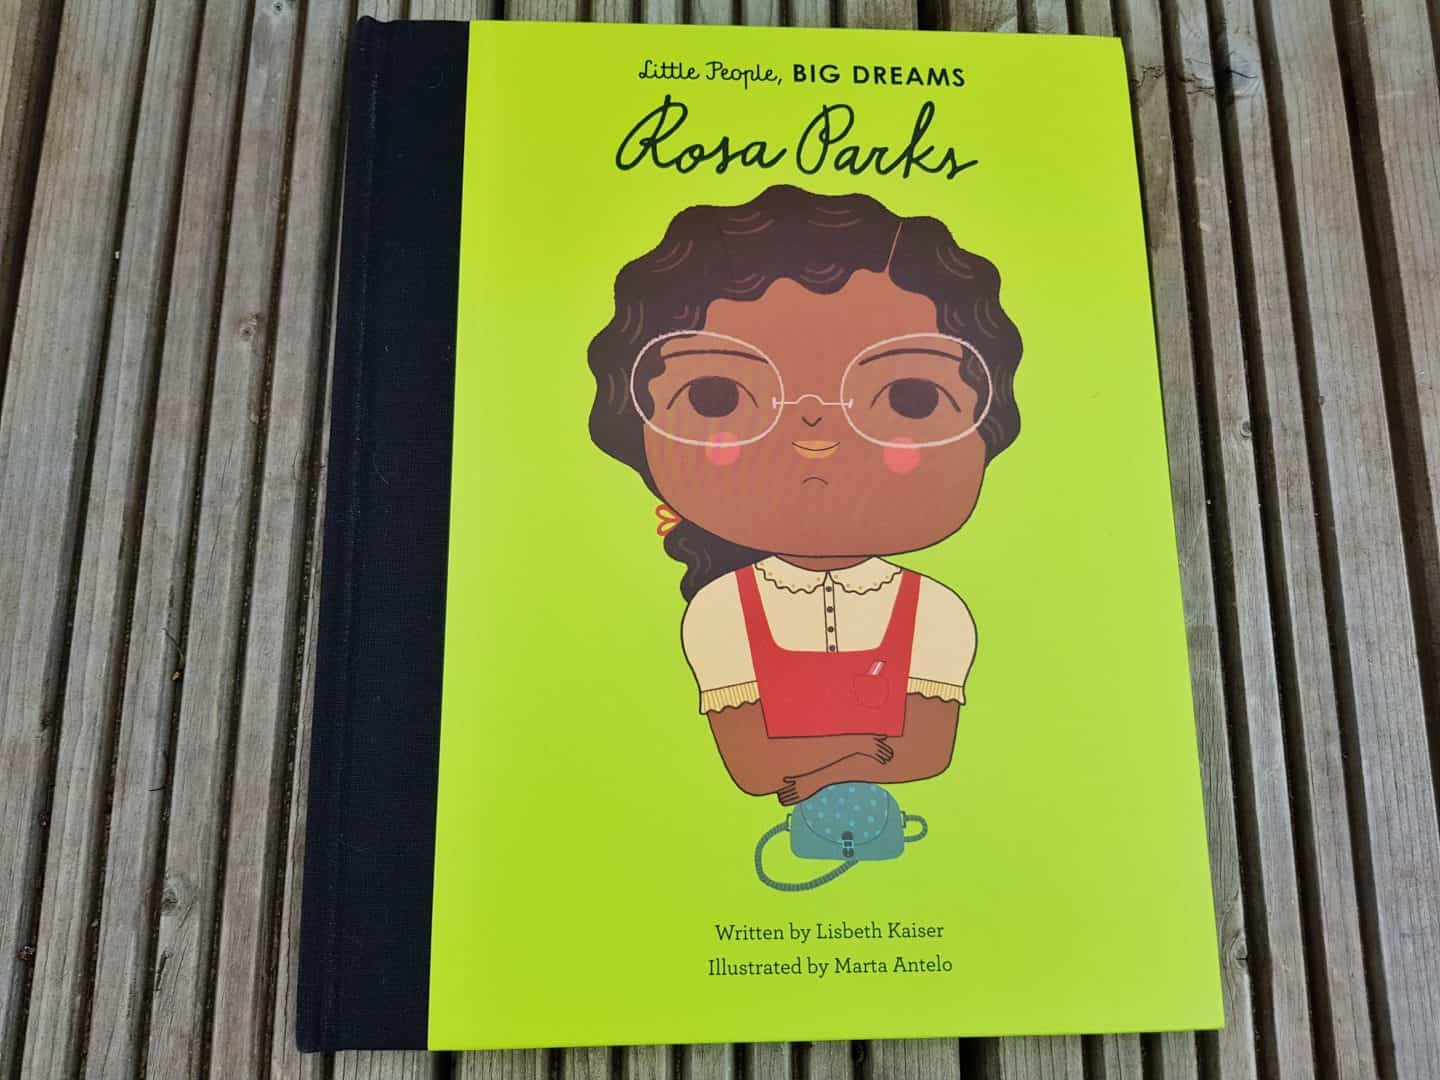 kids book about Rosa Parks